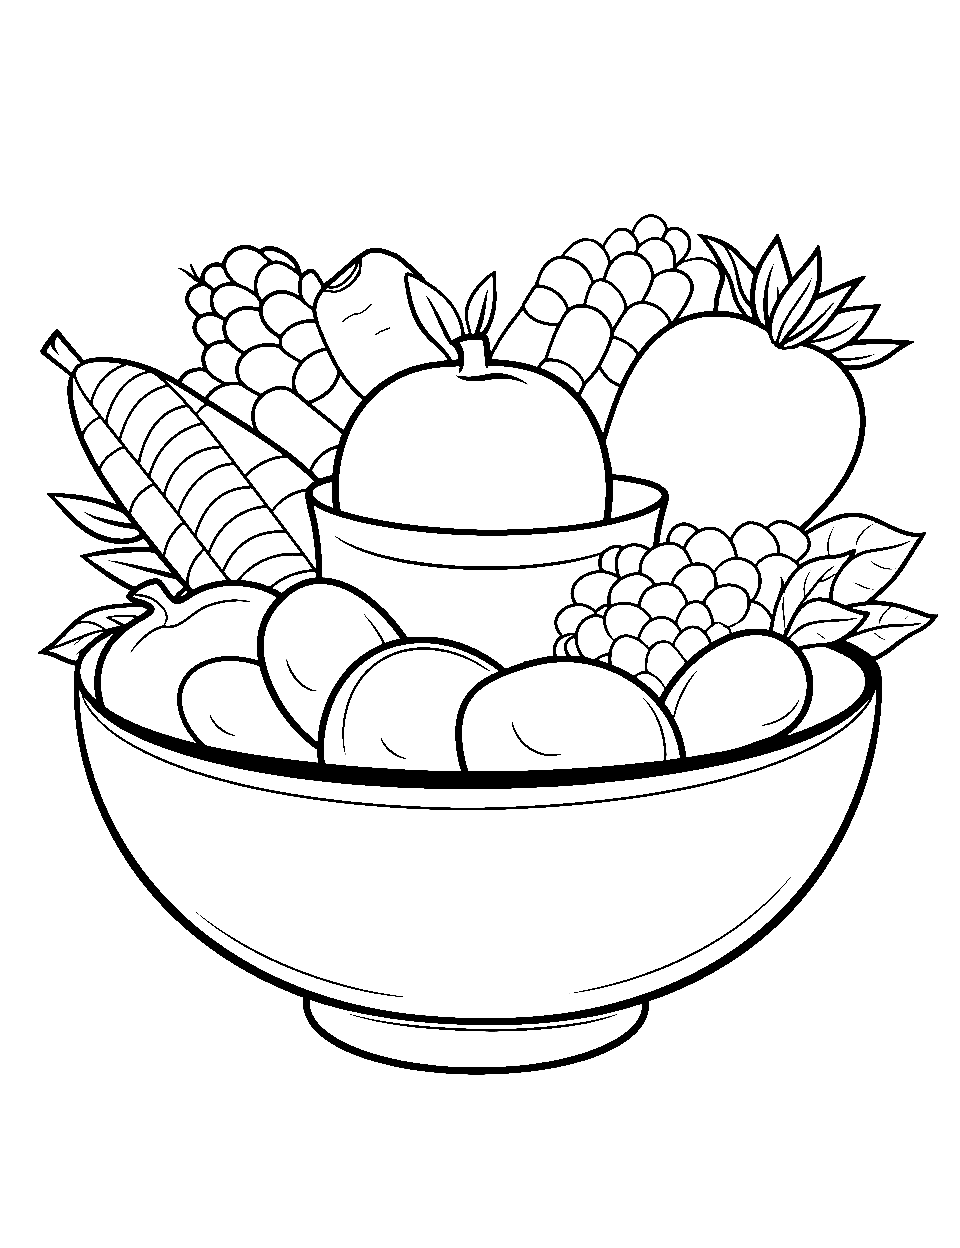 Veggie Bowl Food Coloring Page - A bowl with a bunch of veggies ready to get cooked for an amazing meal.